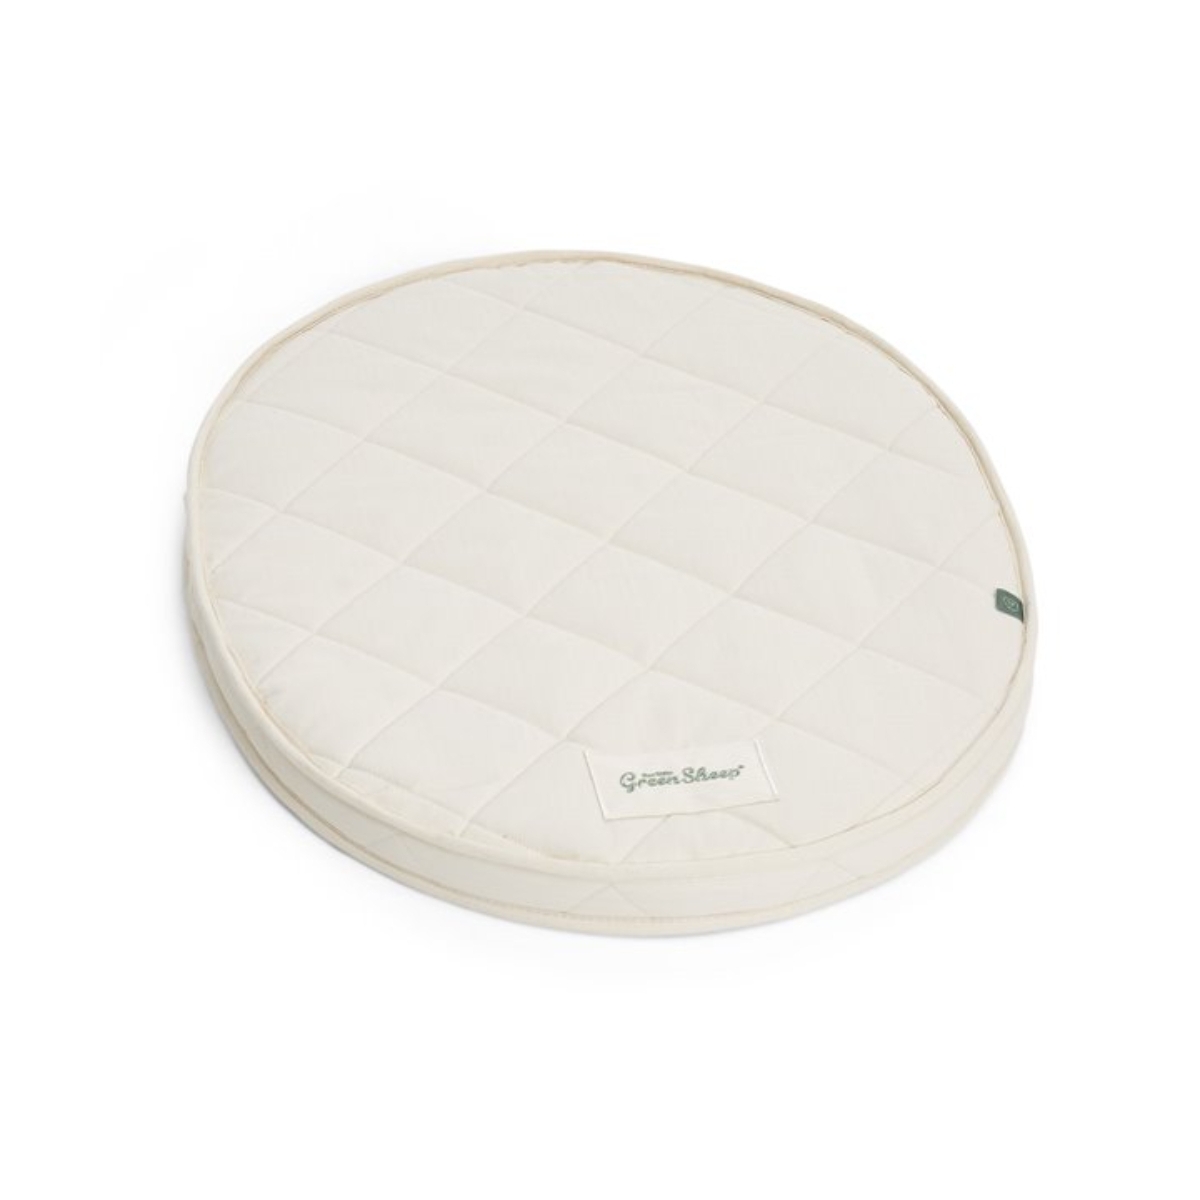 The Little Green Sheep Natural Crib Mattress to fit Stokke Mini Crib Only